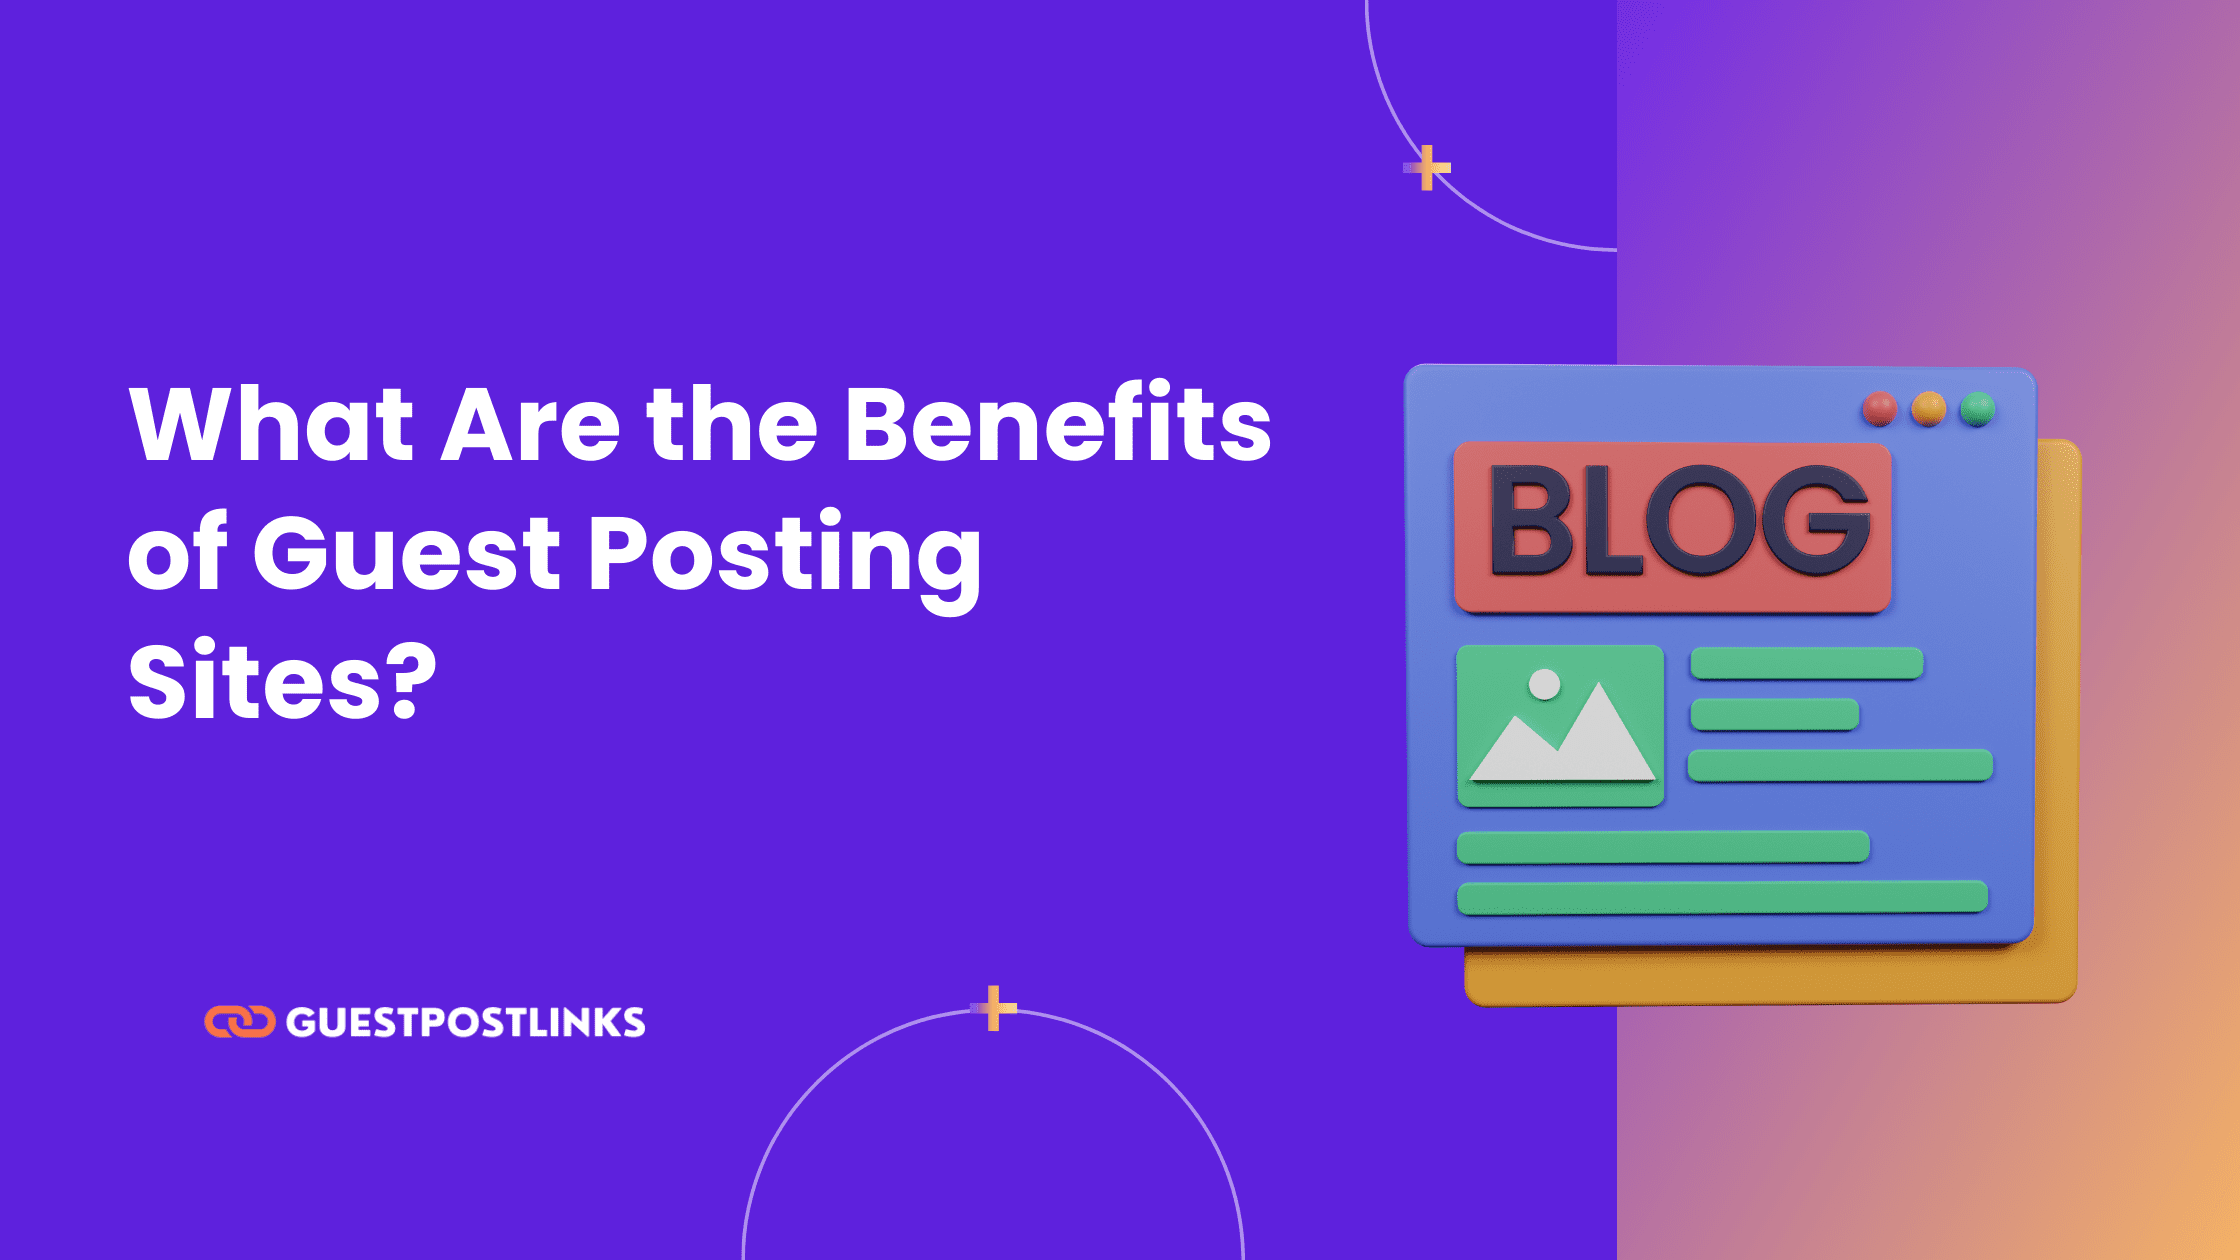 Benefits of Guest Posting Sites